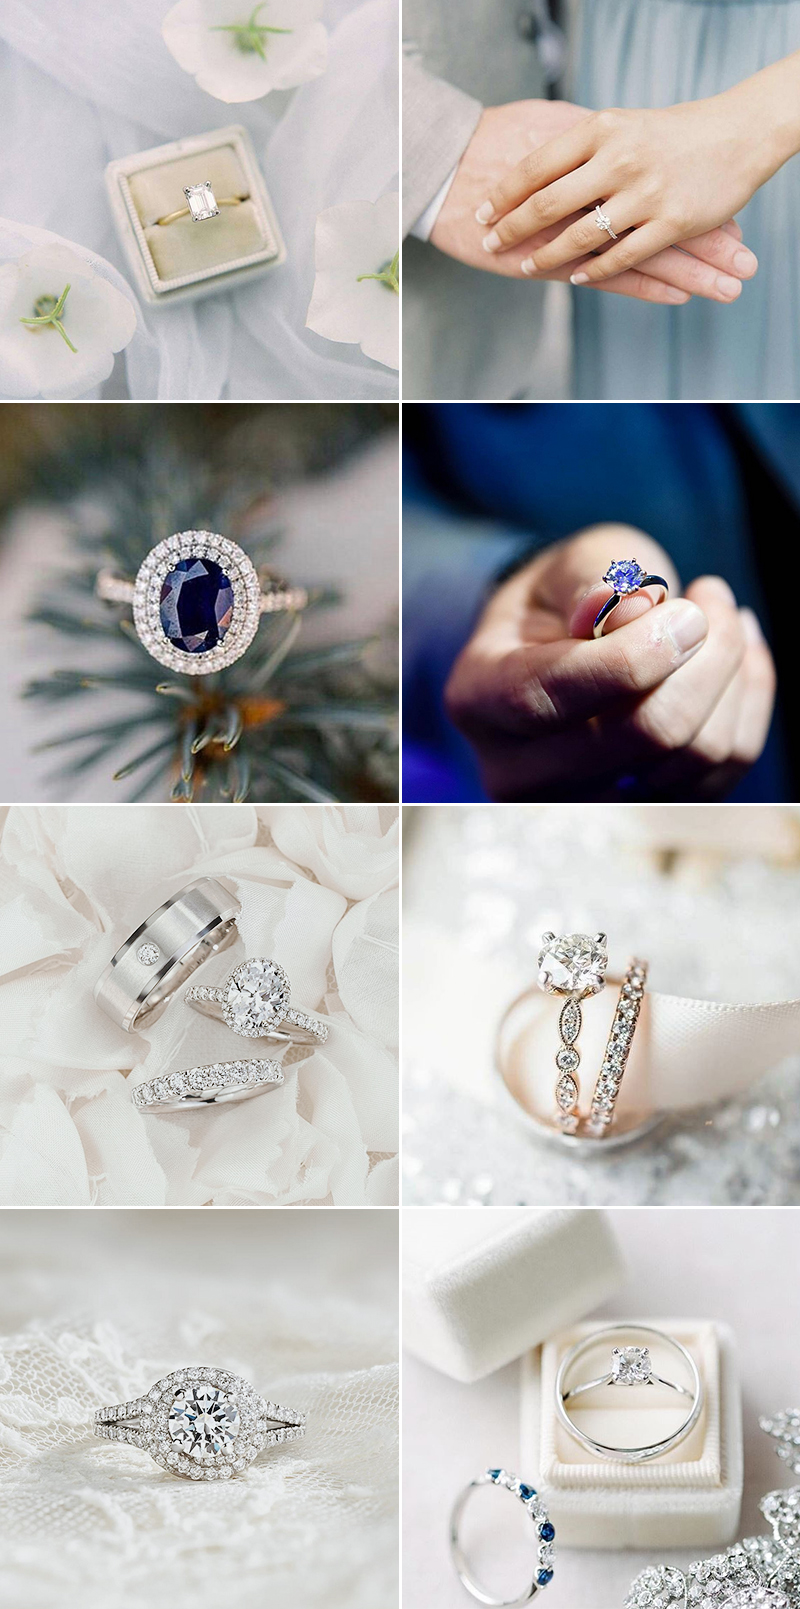 Unique Lab Diamond Engagement Ring With Blue Diamond Accents | Barkev's